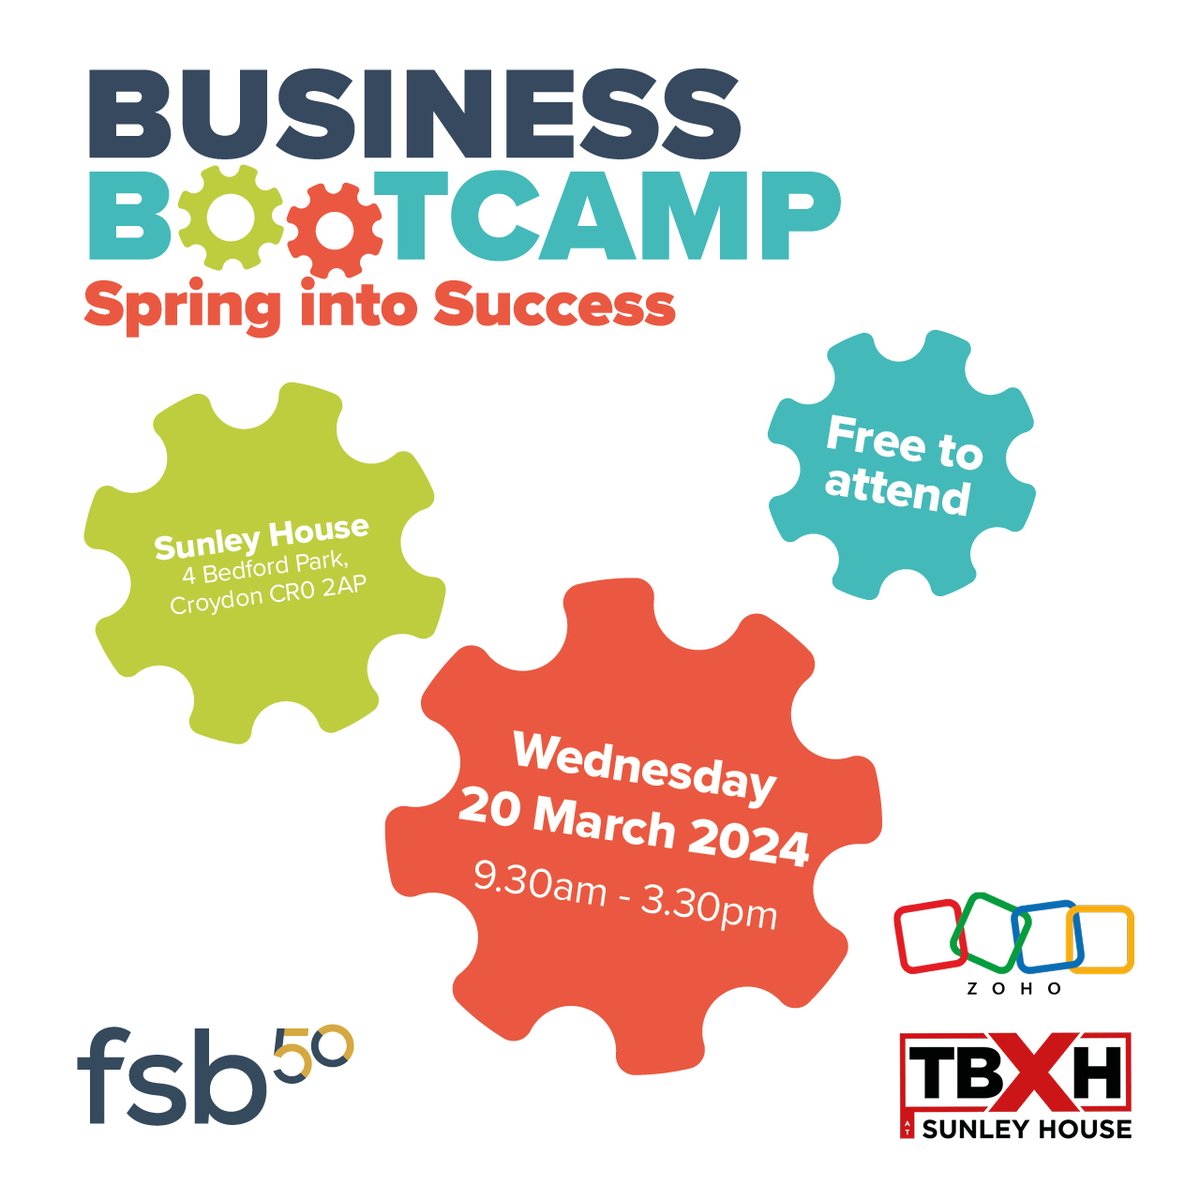 🌱🚀 Only Two Weeks to go! 🚀🌱 Don’t miss your chance to ignite your business potential at our FSB Business Bootcamp: Spring into Success! Our Bootcamp is coming to Croydon on 20th March! Spaces are limited, Book now 🔗 go.fsb.org.uk/3HvDomi